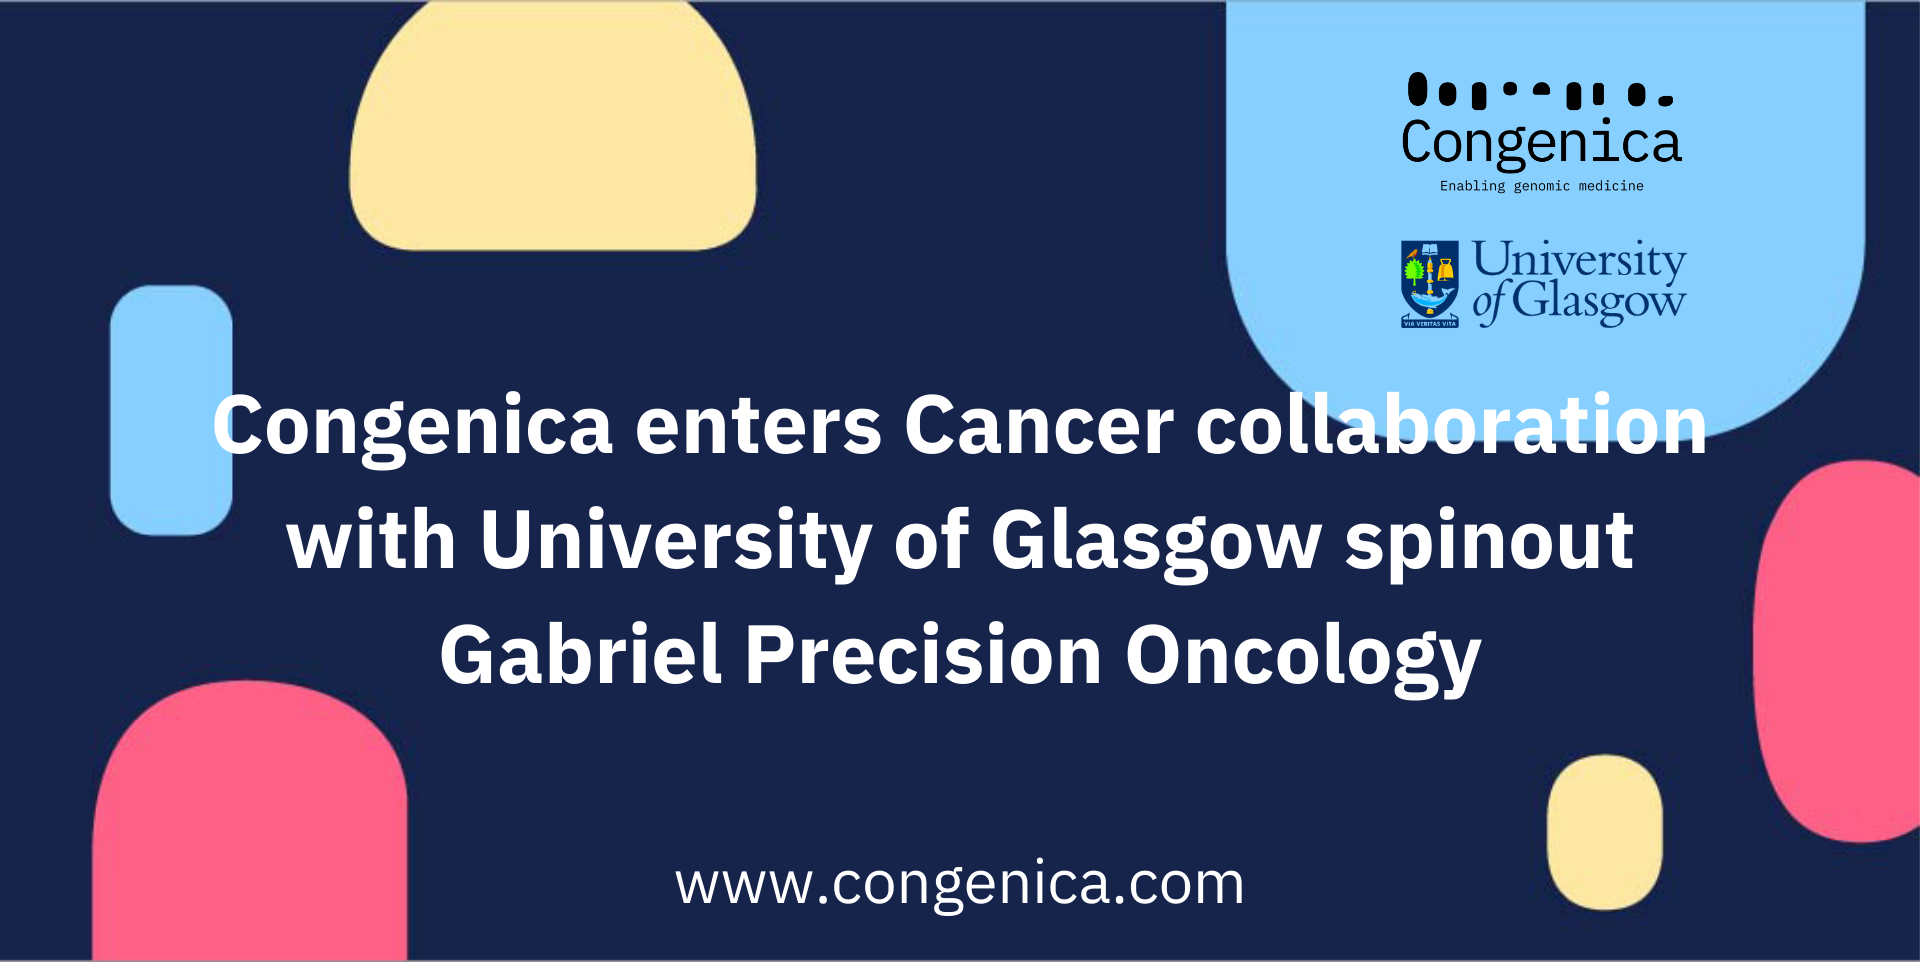 Congenica Enters Cancer Collaboration with University of Glasgow Spinout Gabriel Precision Oncology